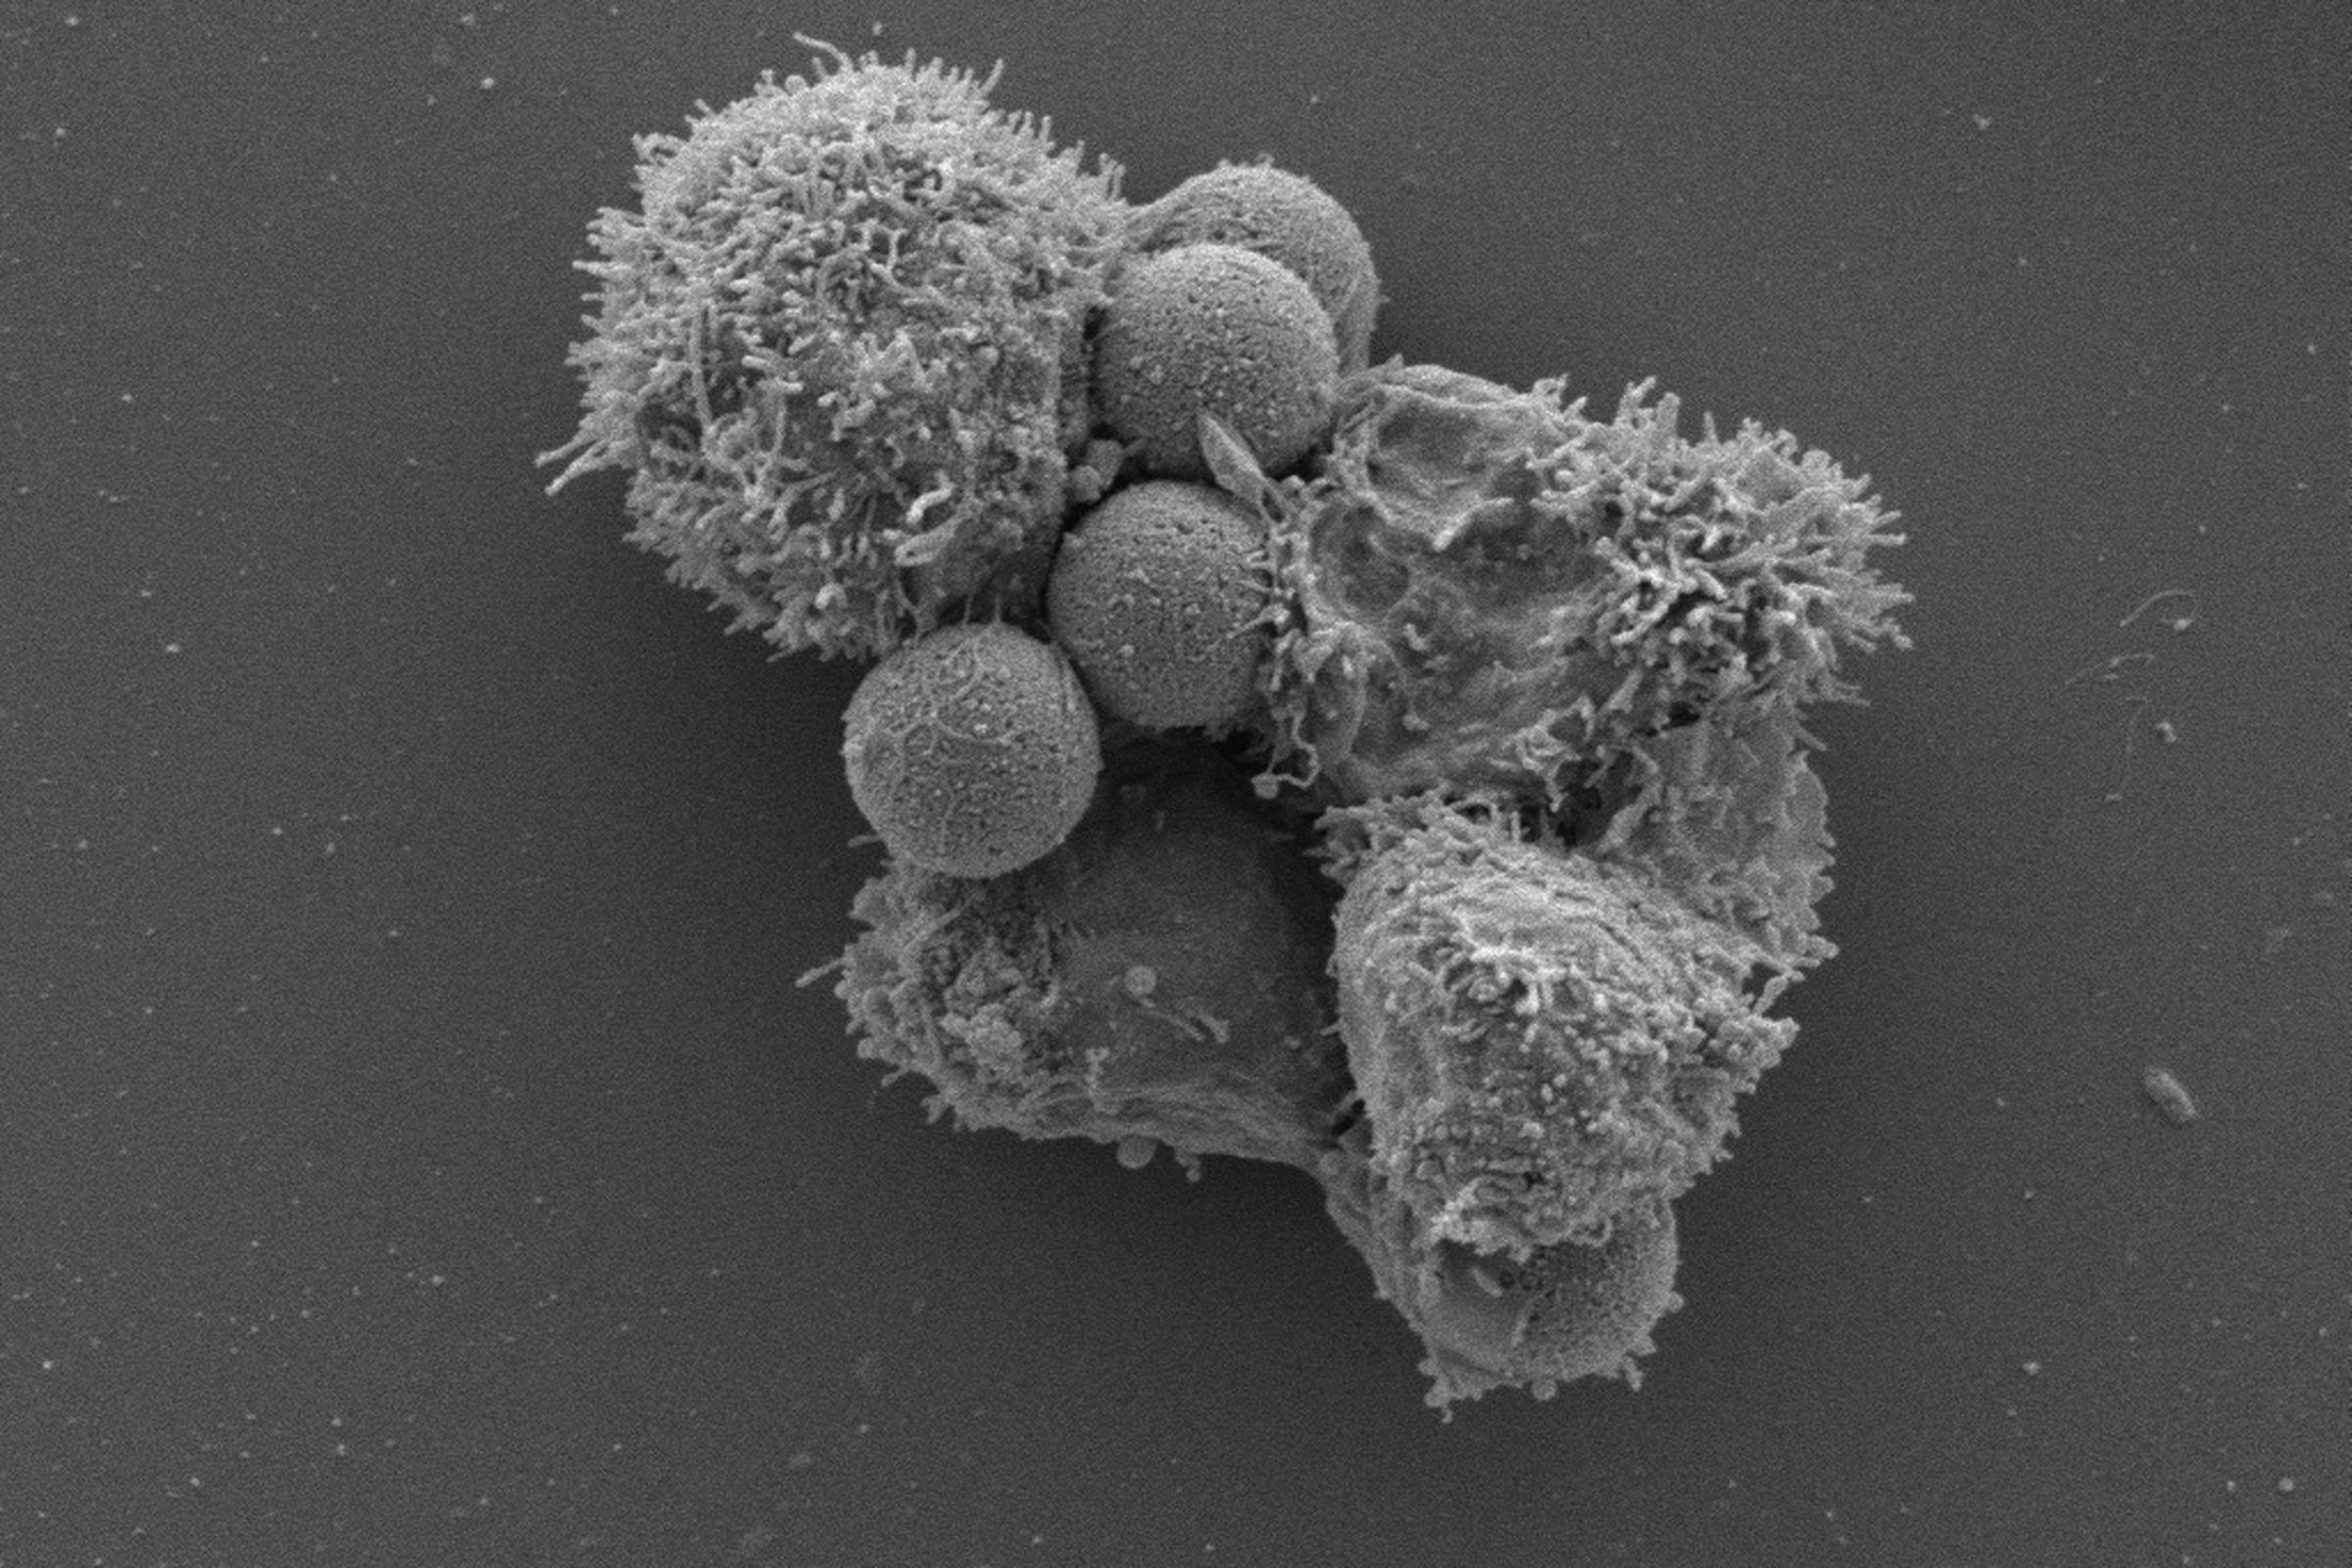 A designer T cell in manufacturing at the University of Pennsylvania. Sample preparation by the Electron Microscopy Resource Laboratory of the Perelman School of Medicine.